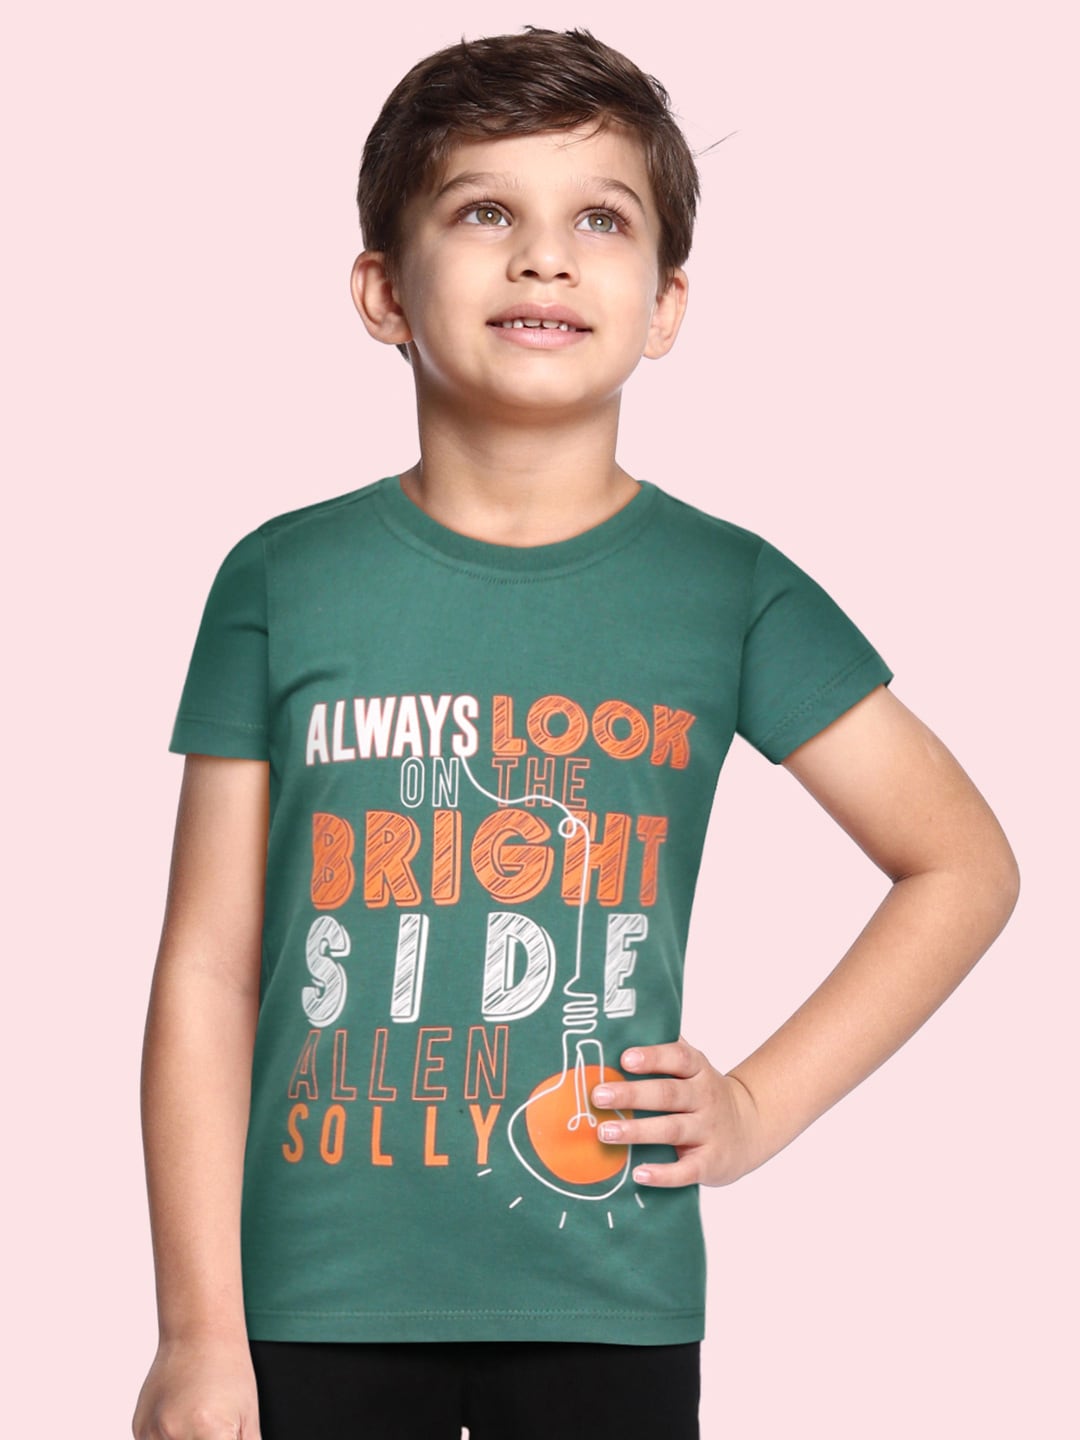 Allen Solly Junior  T-shirt Starts from Rs. 199